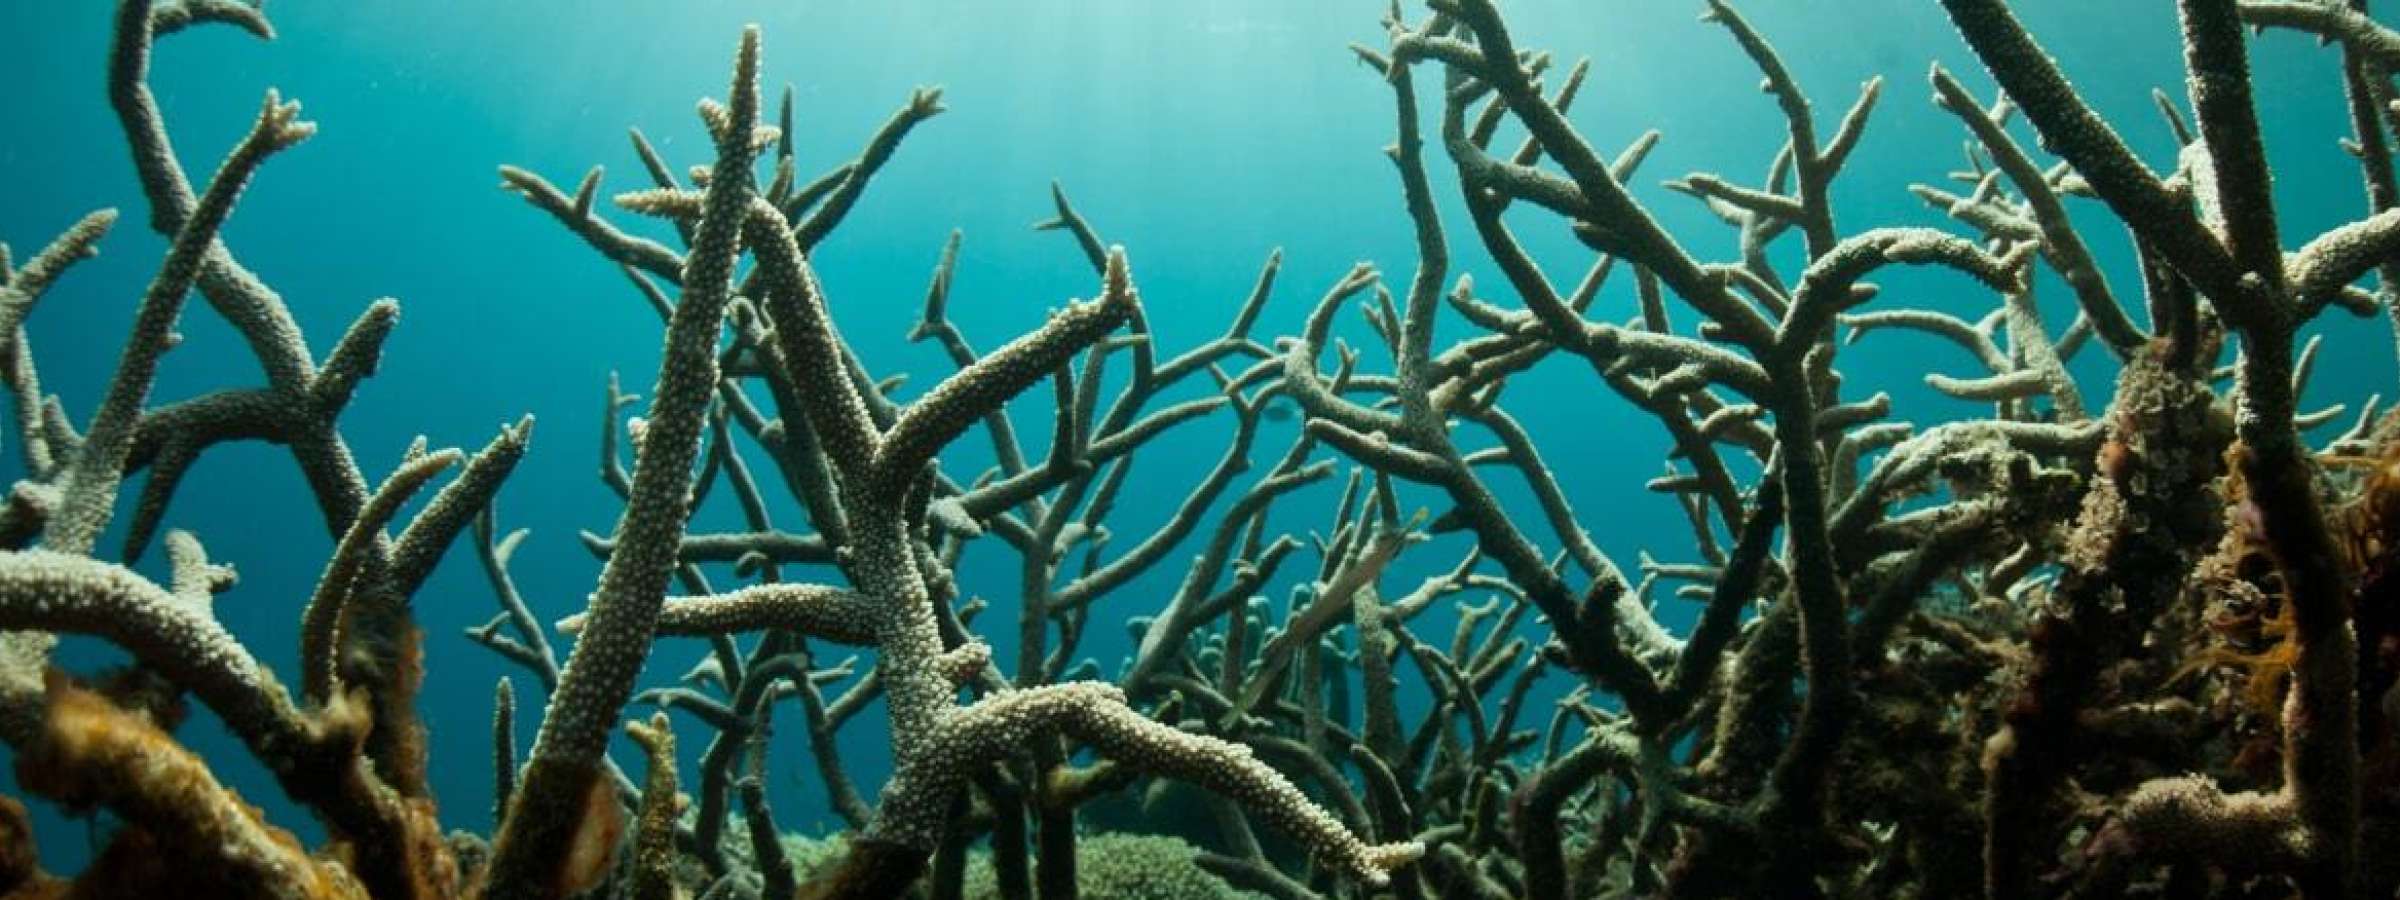 Field of dead corals, due to warming oceans